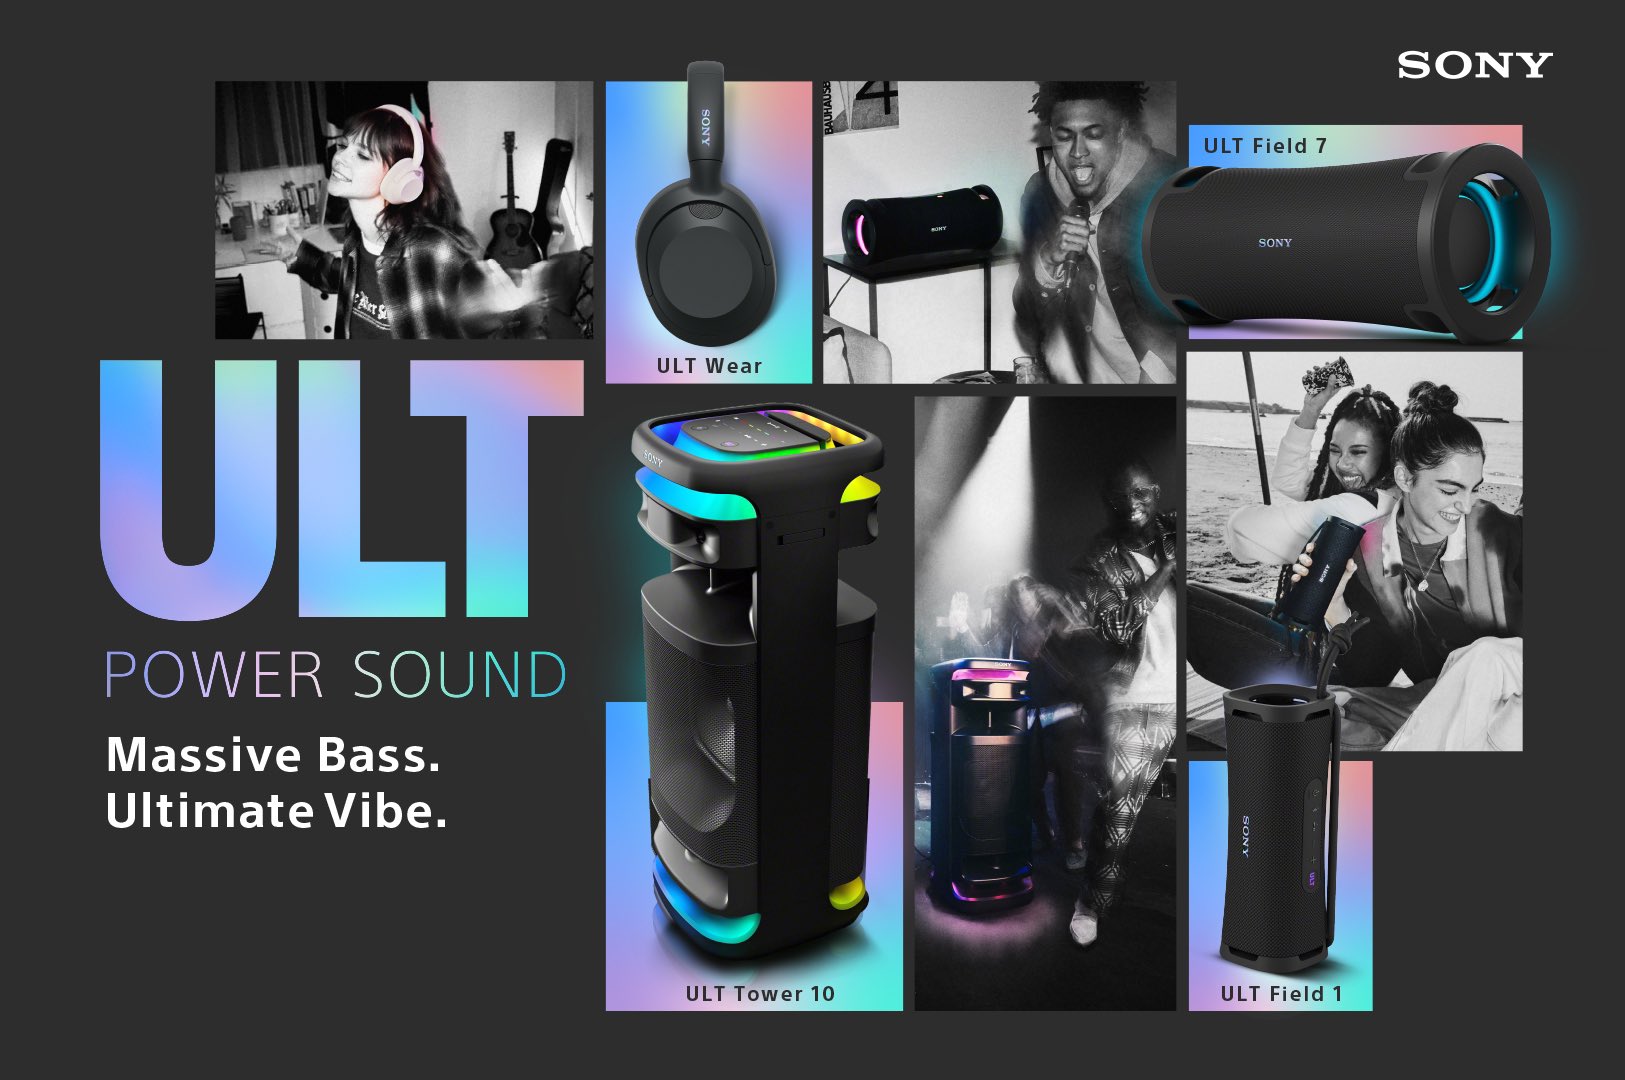 Massive Bass. Ultimate Vibe –Sony introduces ULT POWER SOUND, a new series of speakers and headphones.